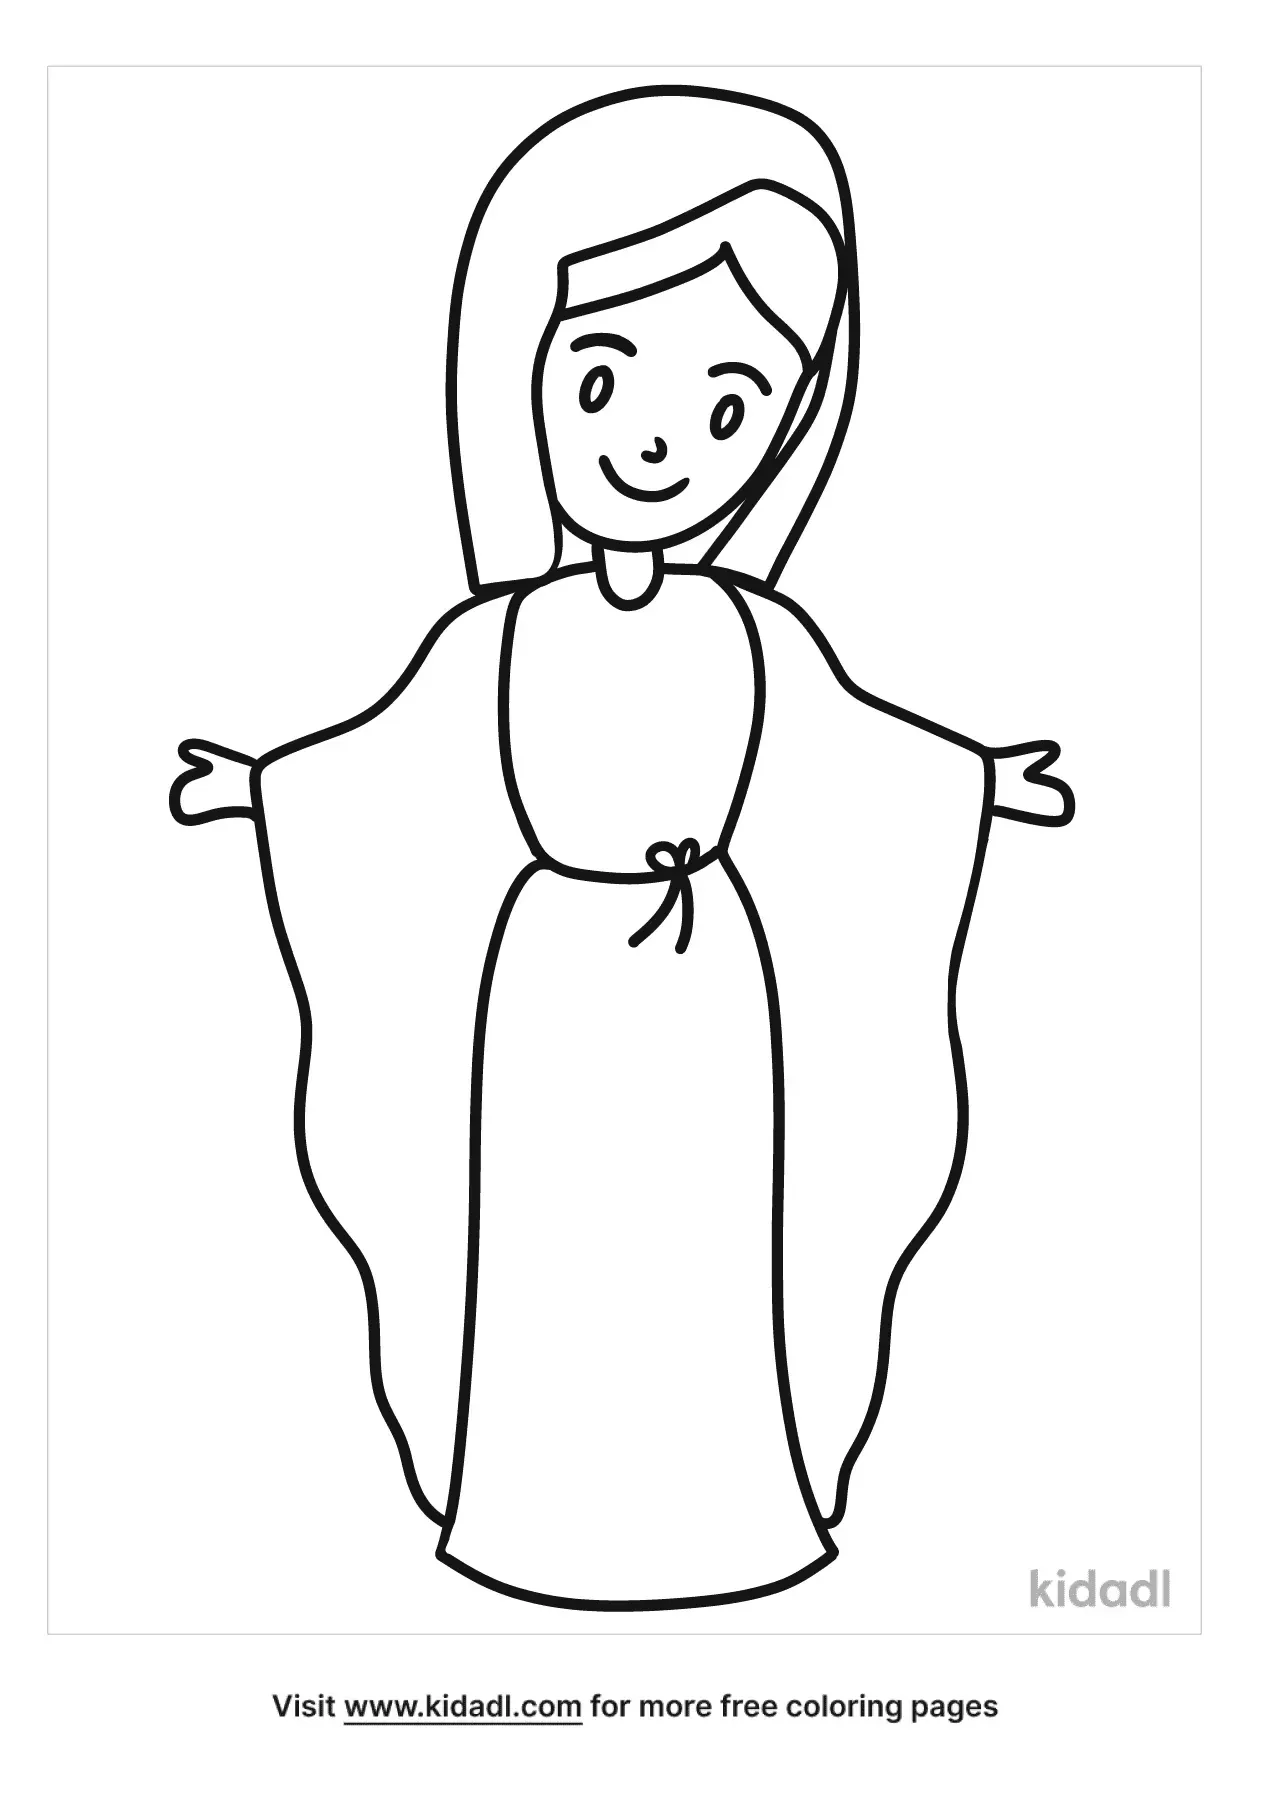 Free Hail Mary Coloring Page | Coloring Page Printables | Kidadl